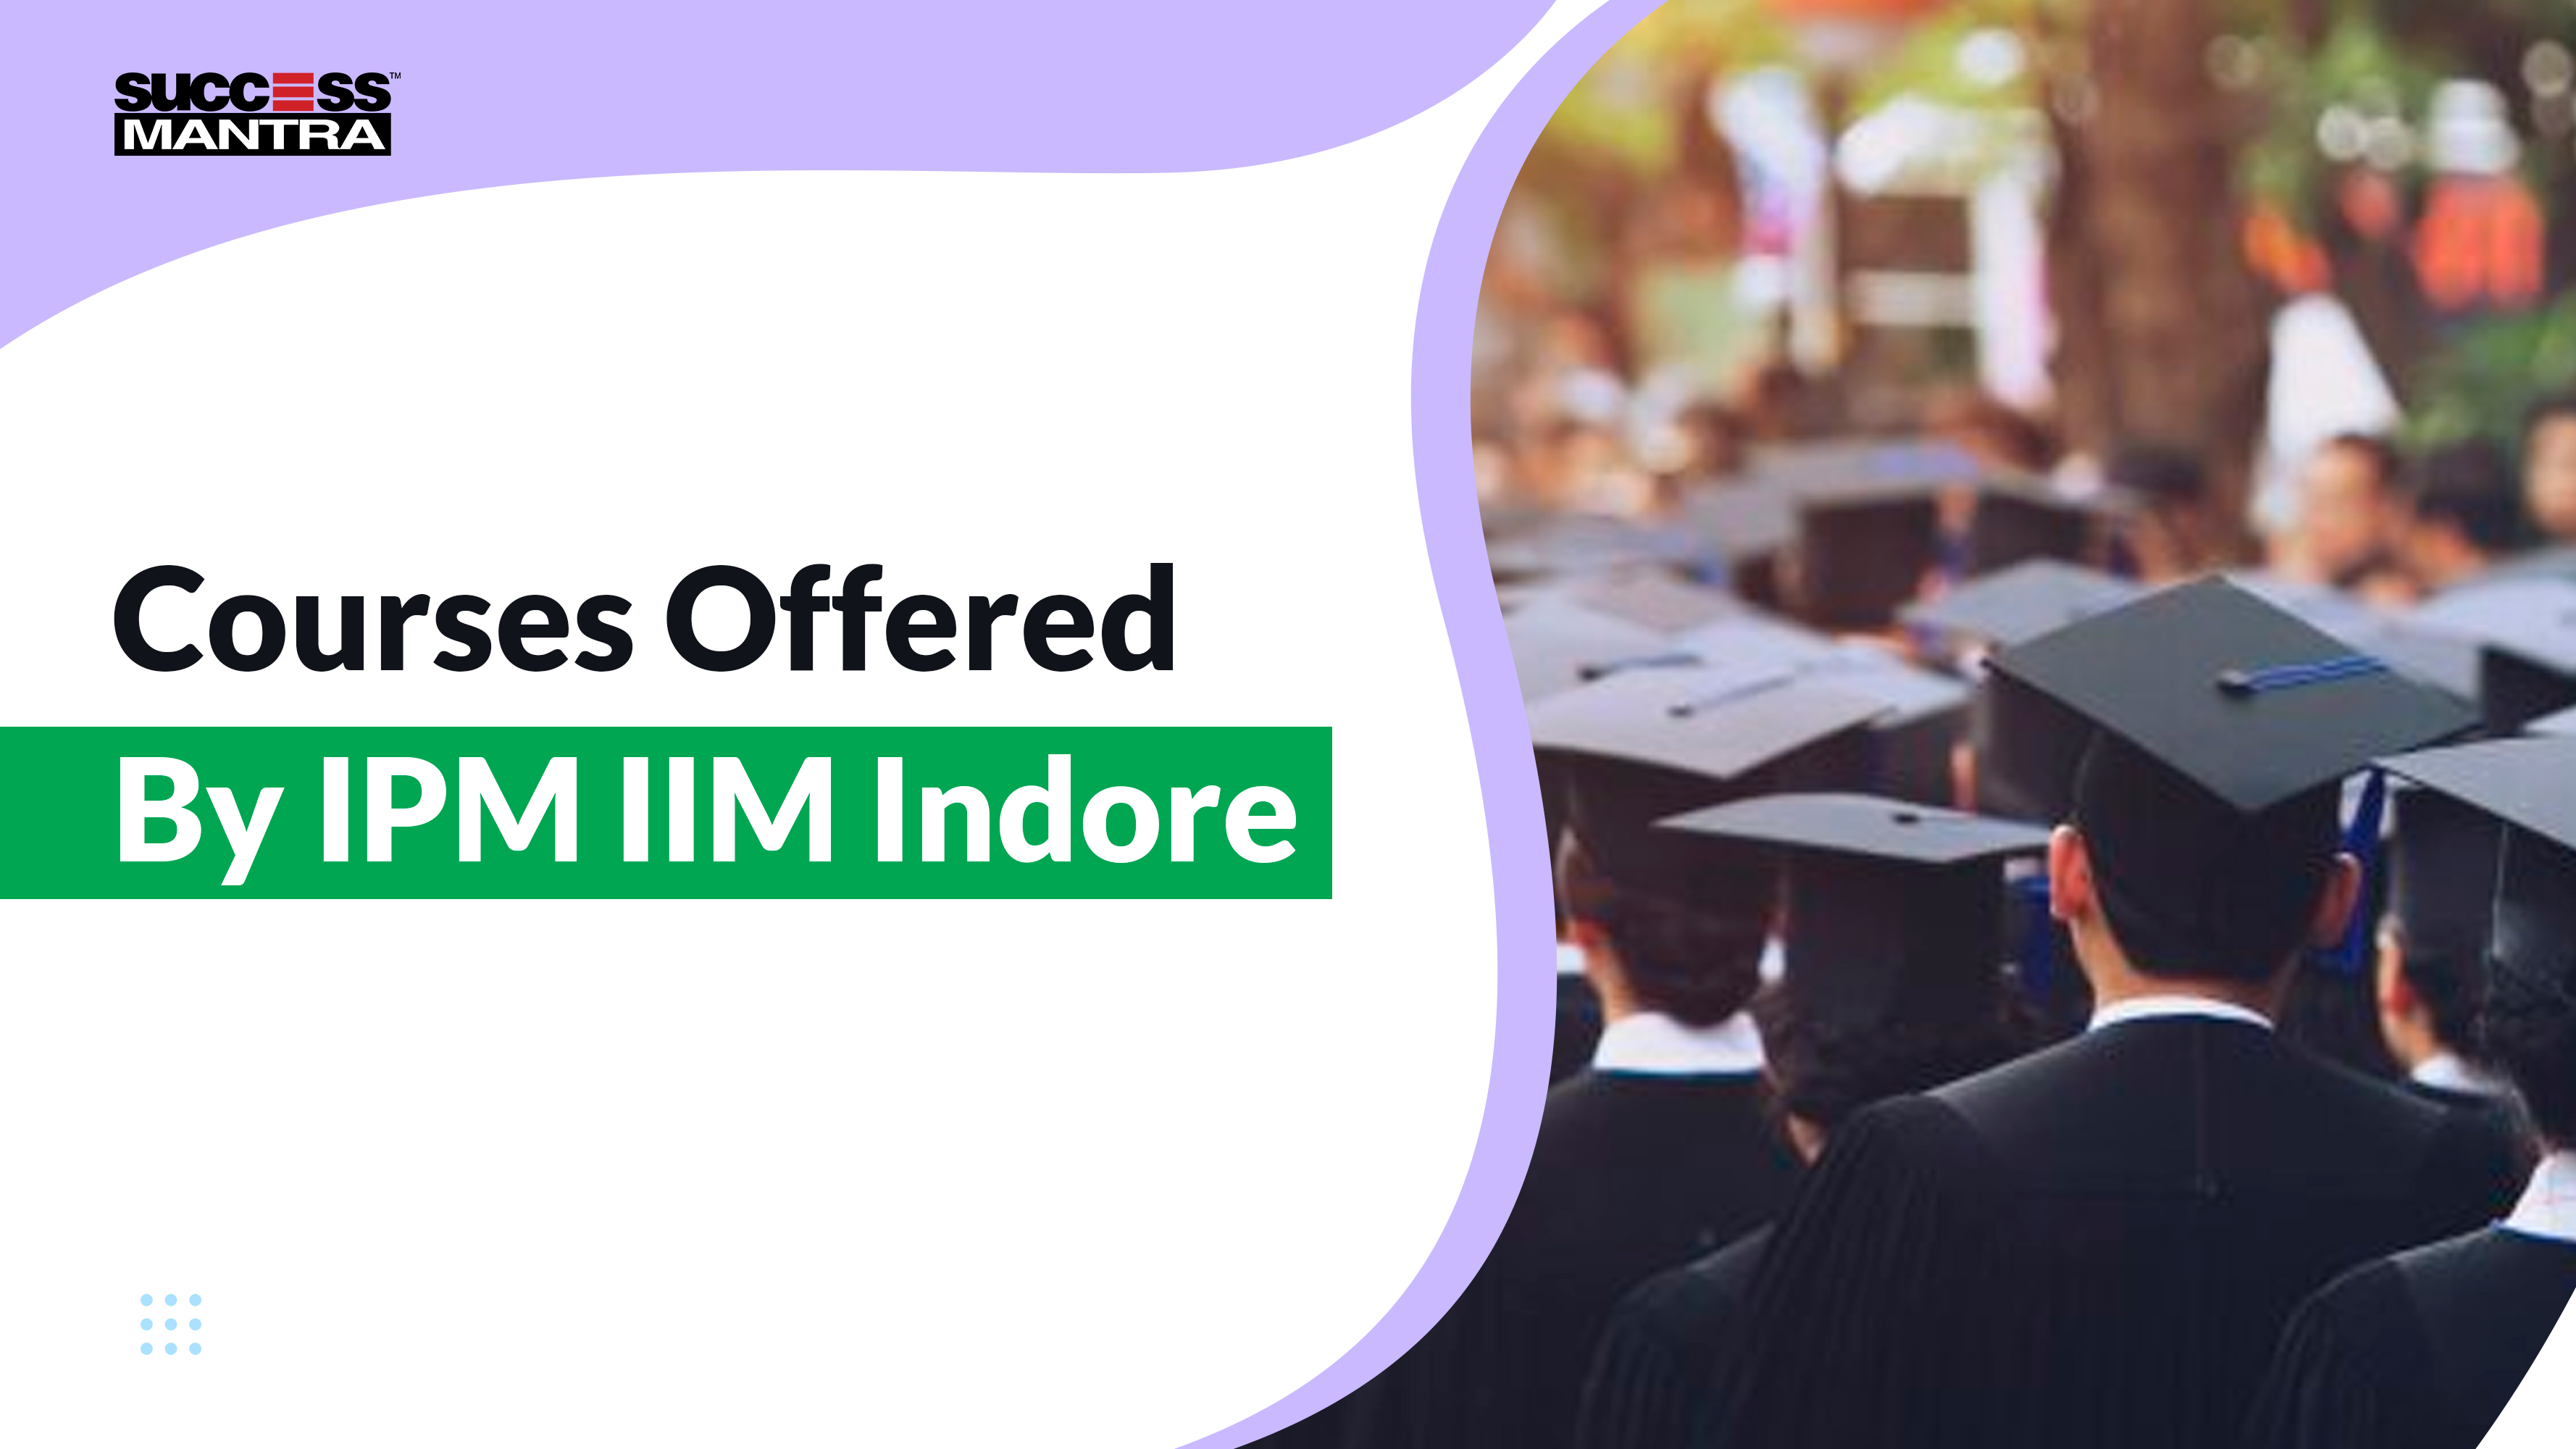 Courses Offered By IPM IIM Indore, Success Mantra Coaching Institute, Best Coaching Institute For BBA Located In GTB Nagar Delhi 